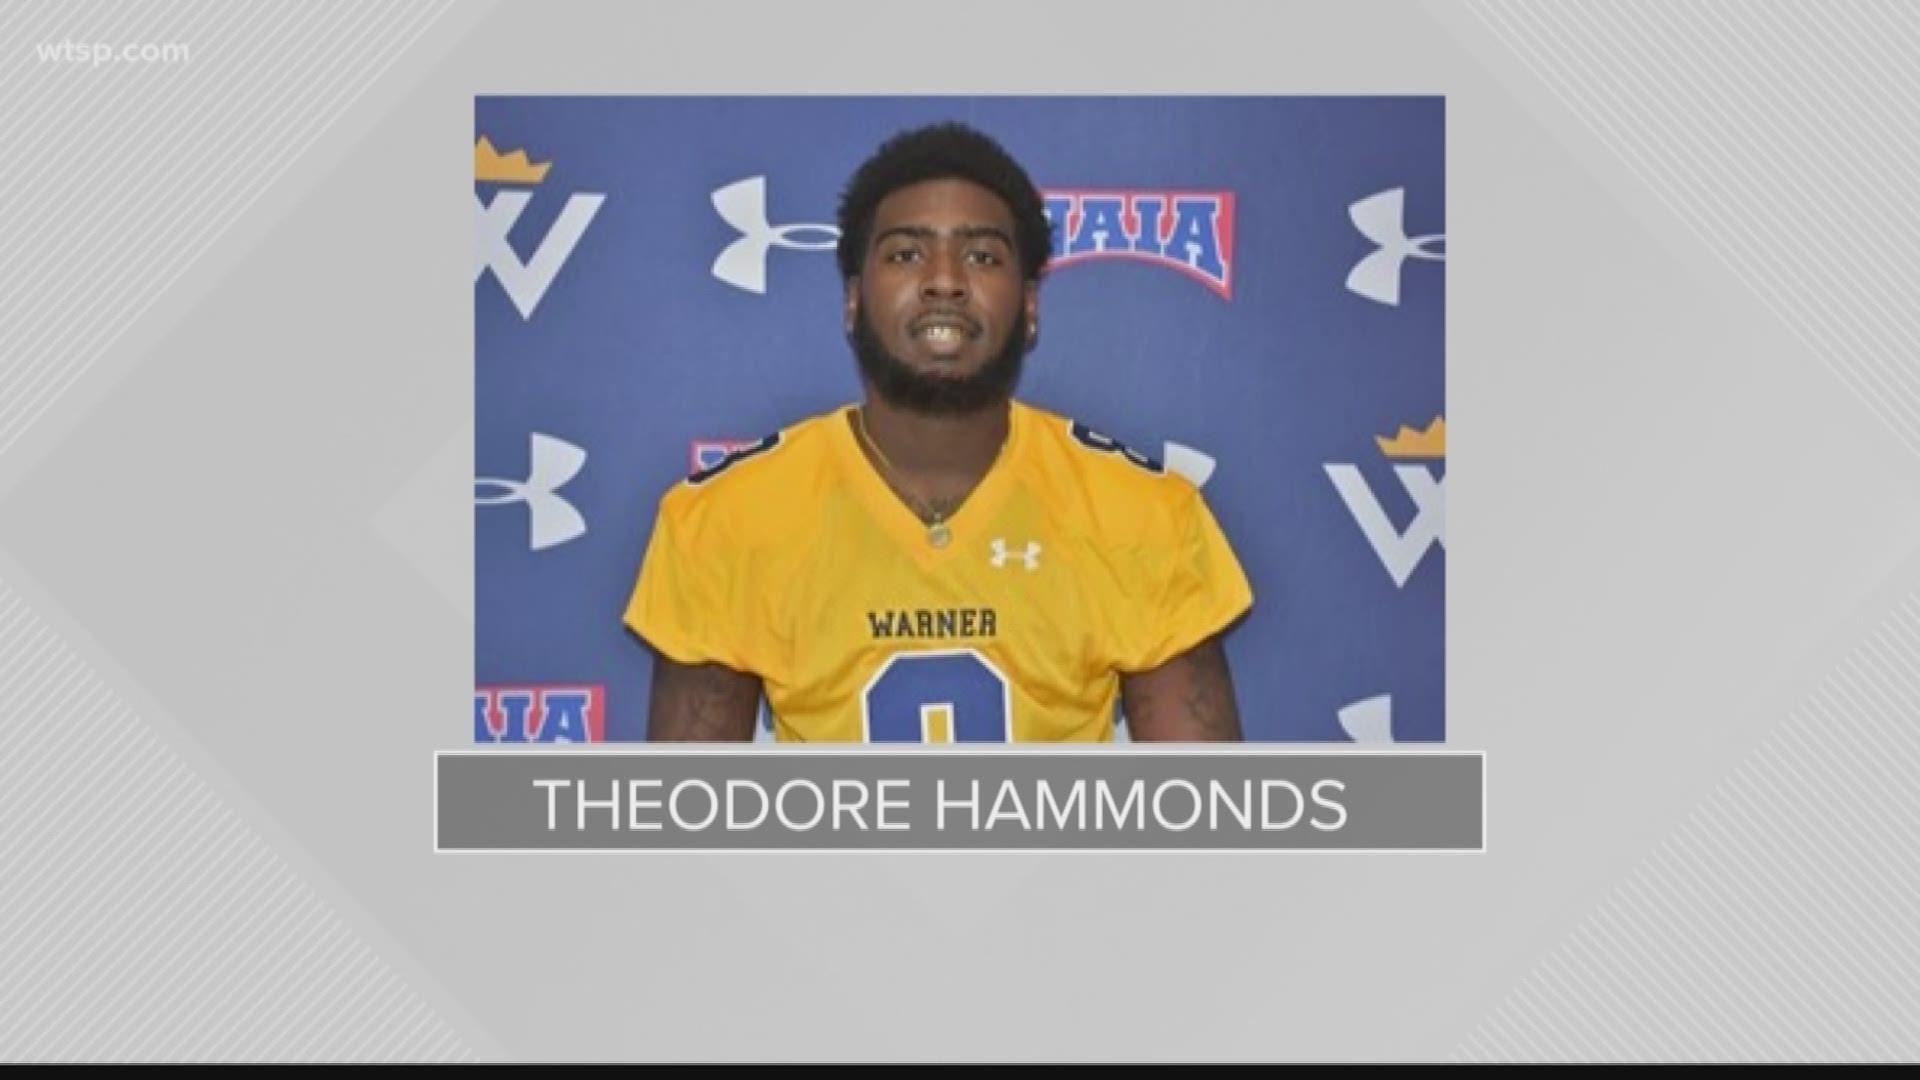 Theodore "Boobie" Hammonds collapsed Tuesday after the drill and quickly was tended to by athletic training staff and Polk County Emergency Services.